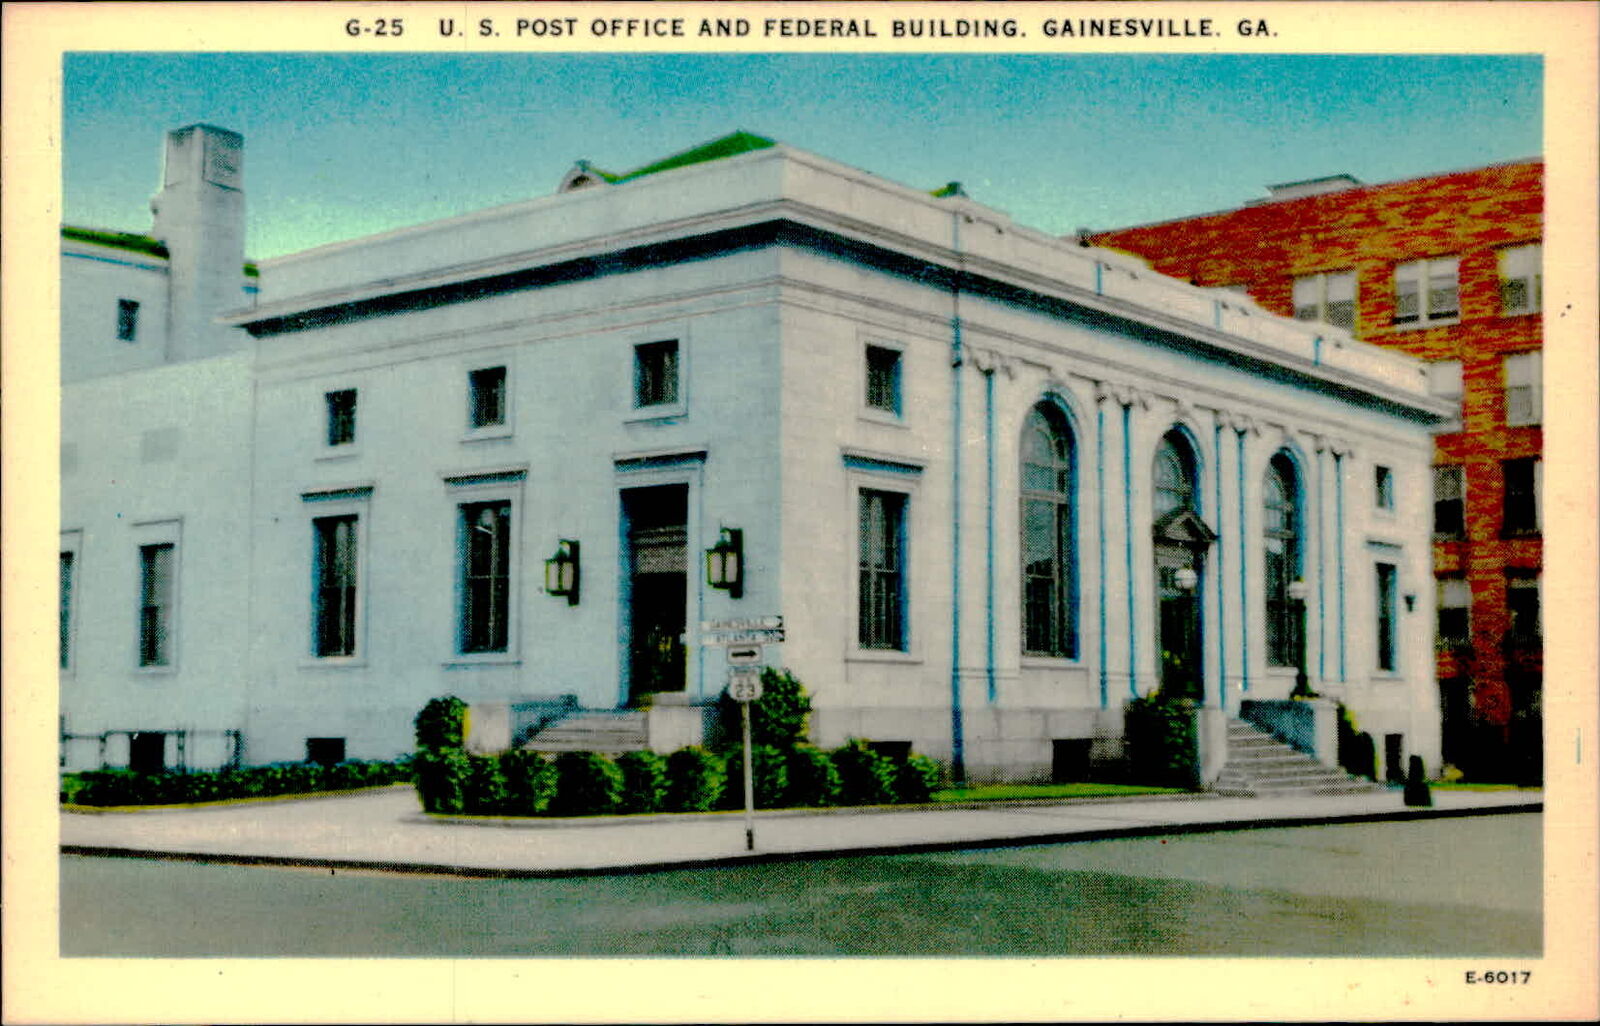 Postcard: G-25 U. S. POST OFFICE AND FEDERAL BUILDING. GAINESVILLE. GA